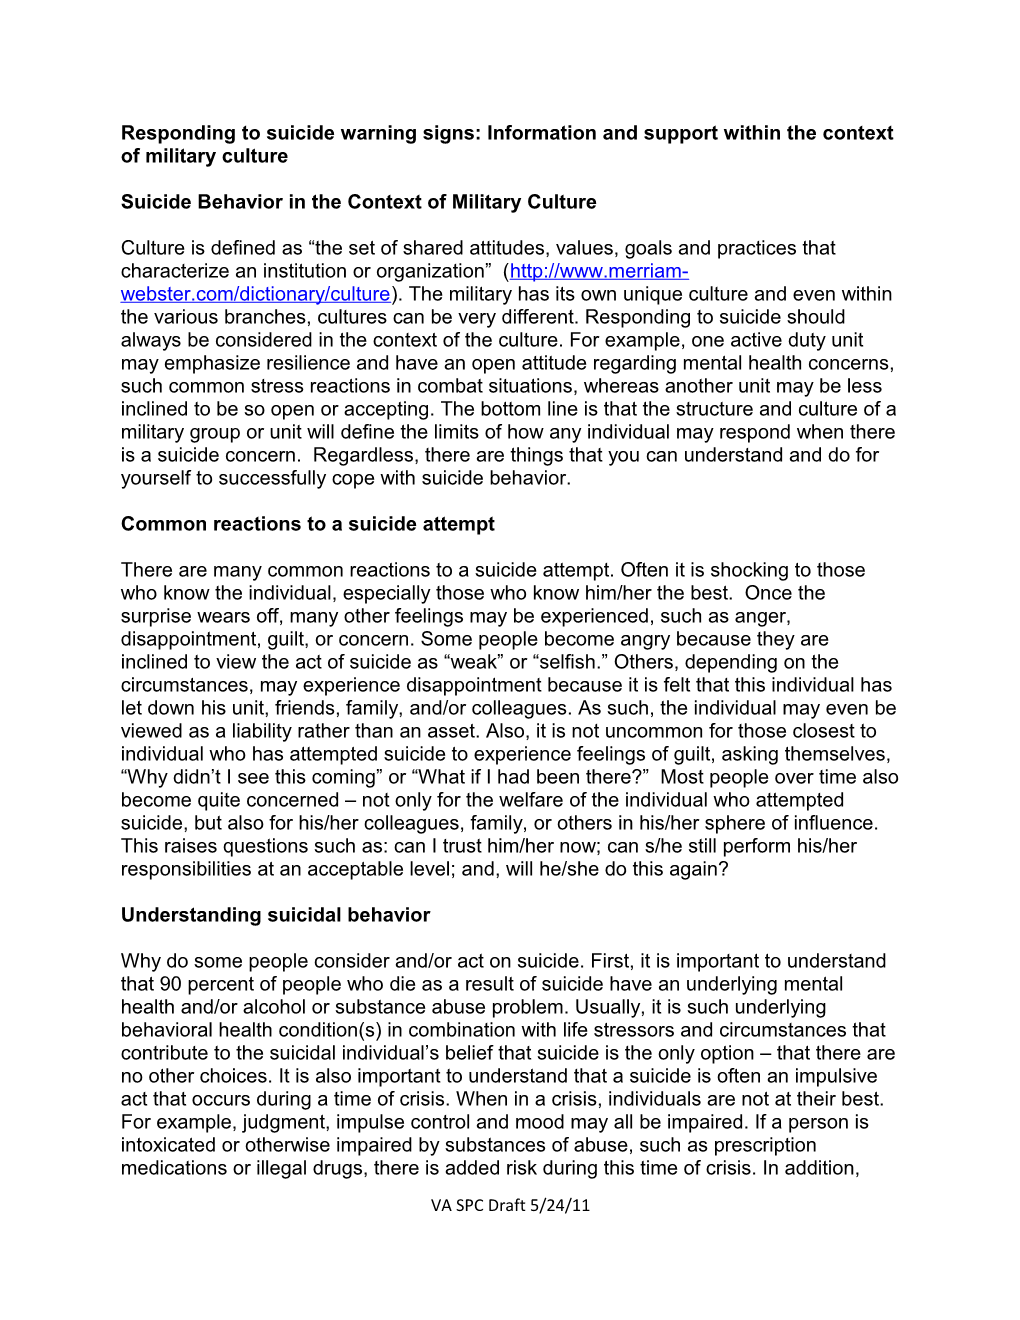 Suicide Behavior in the Context of Military Culture